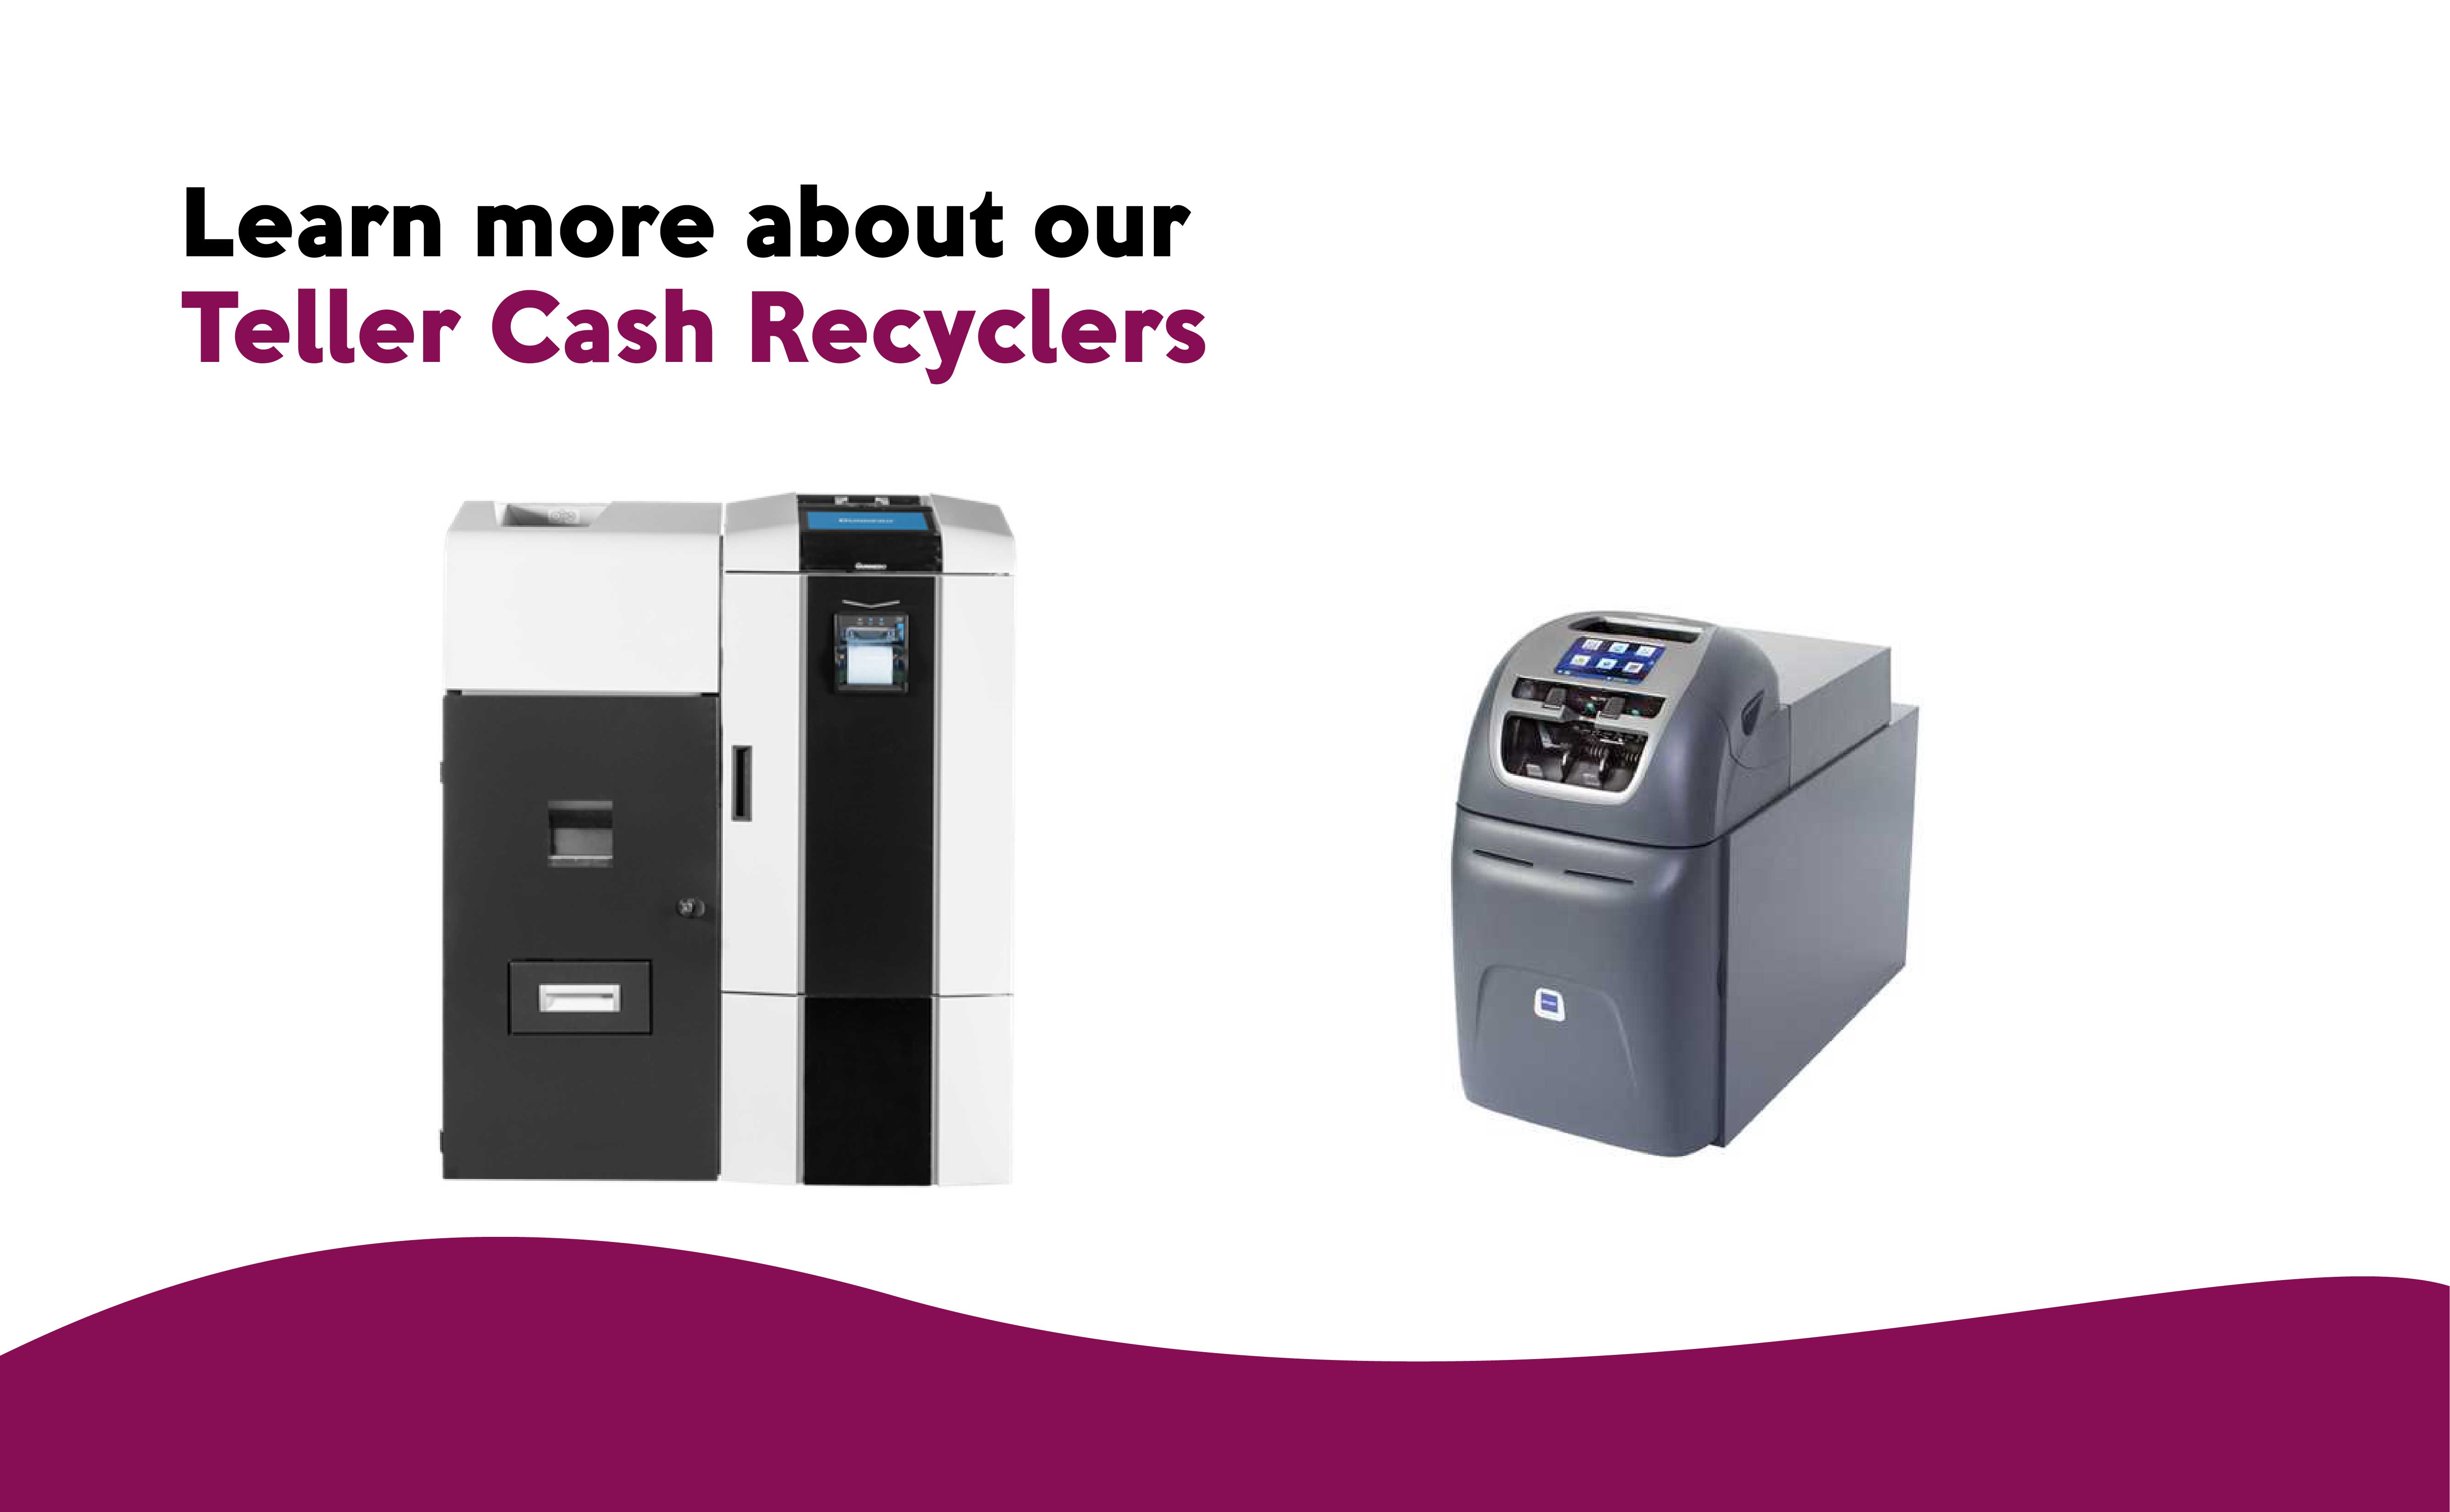 Teller Cash Recyclers